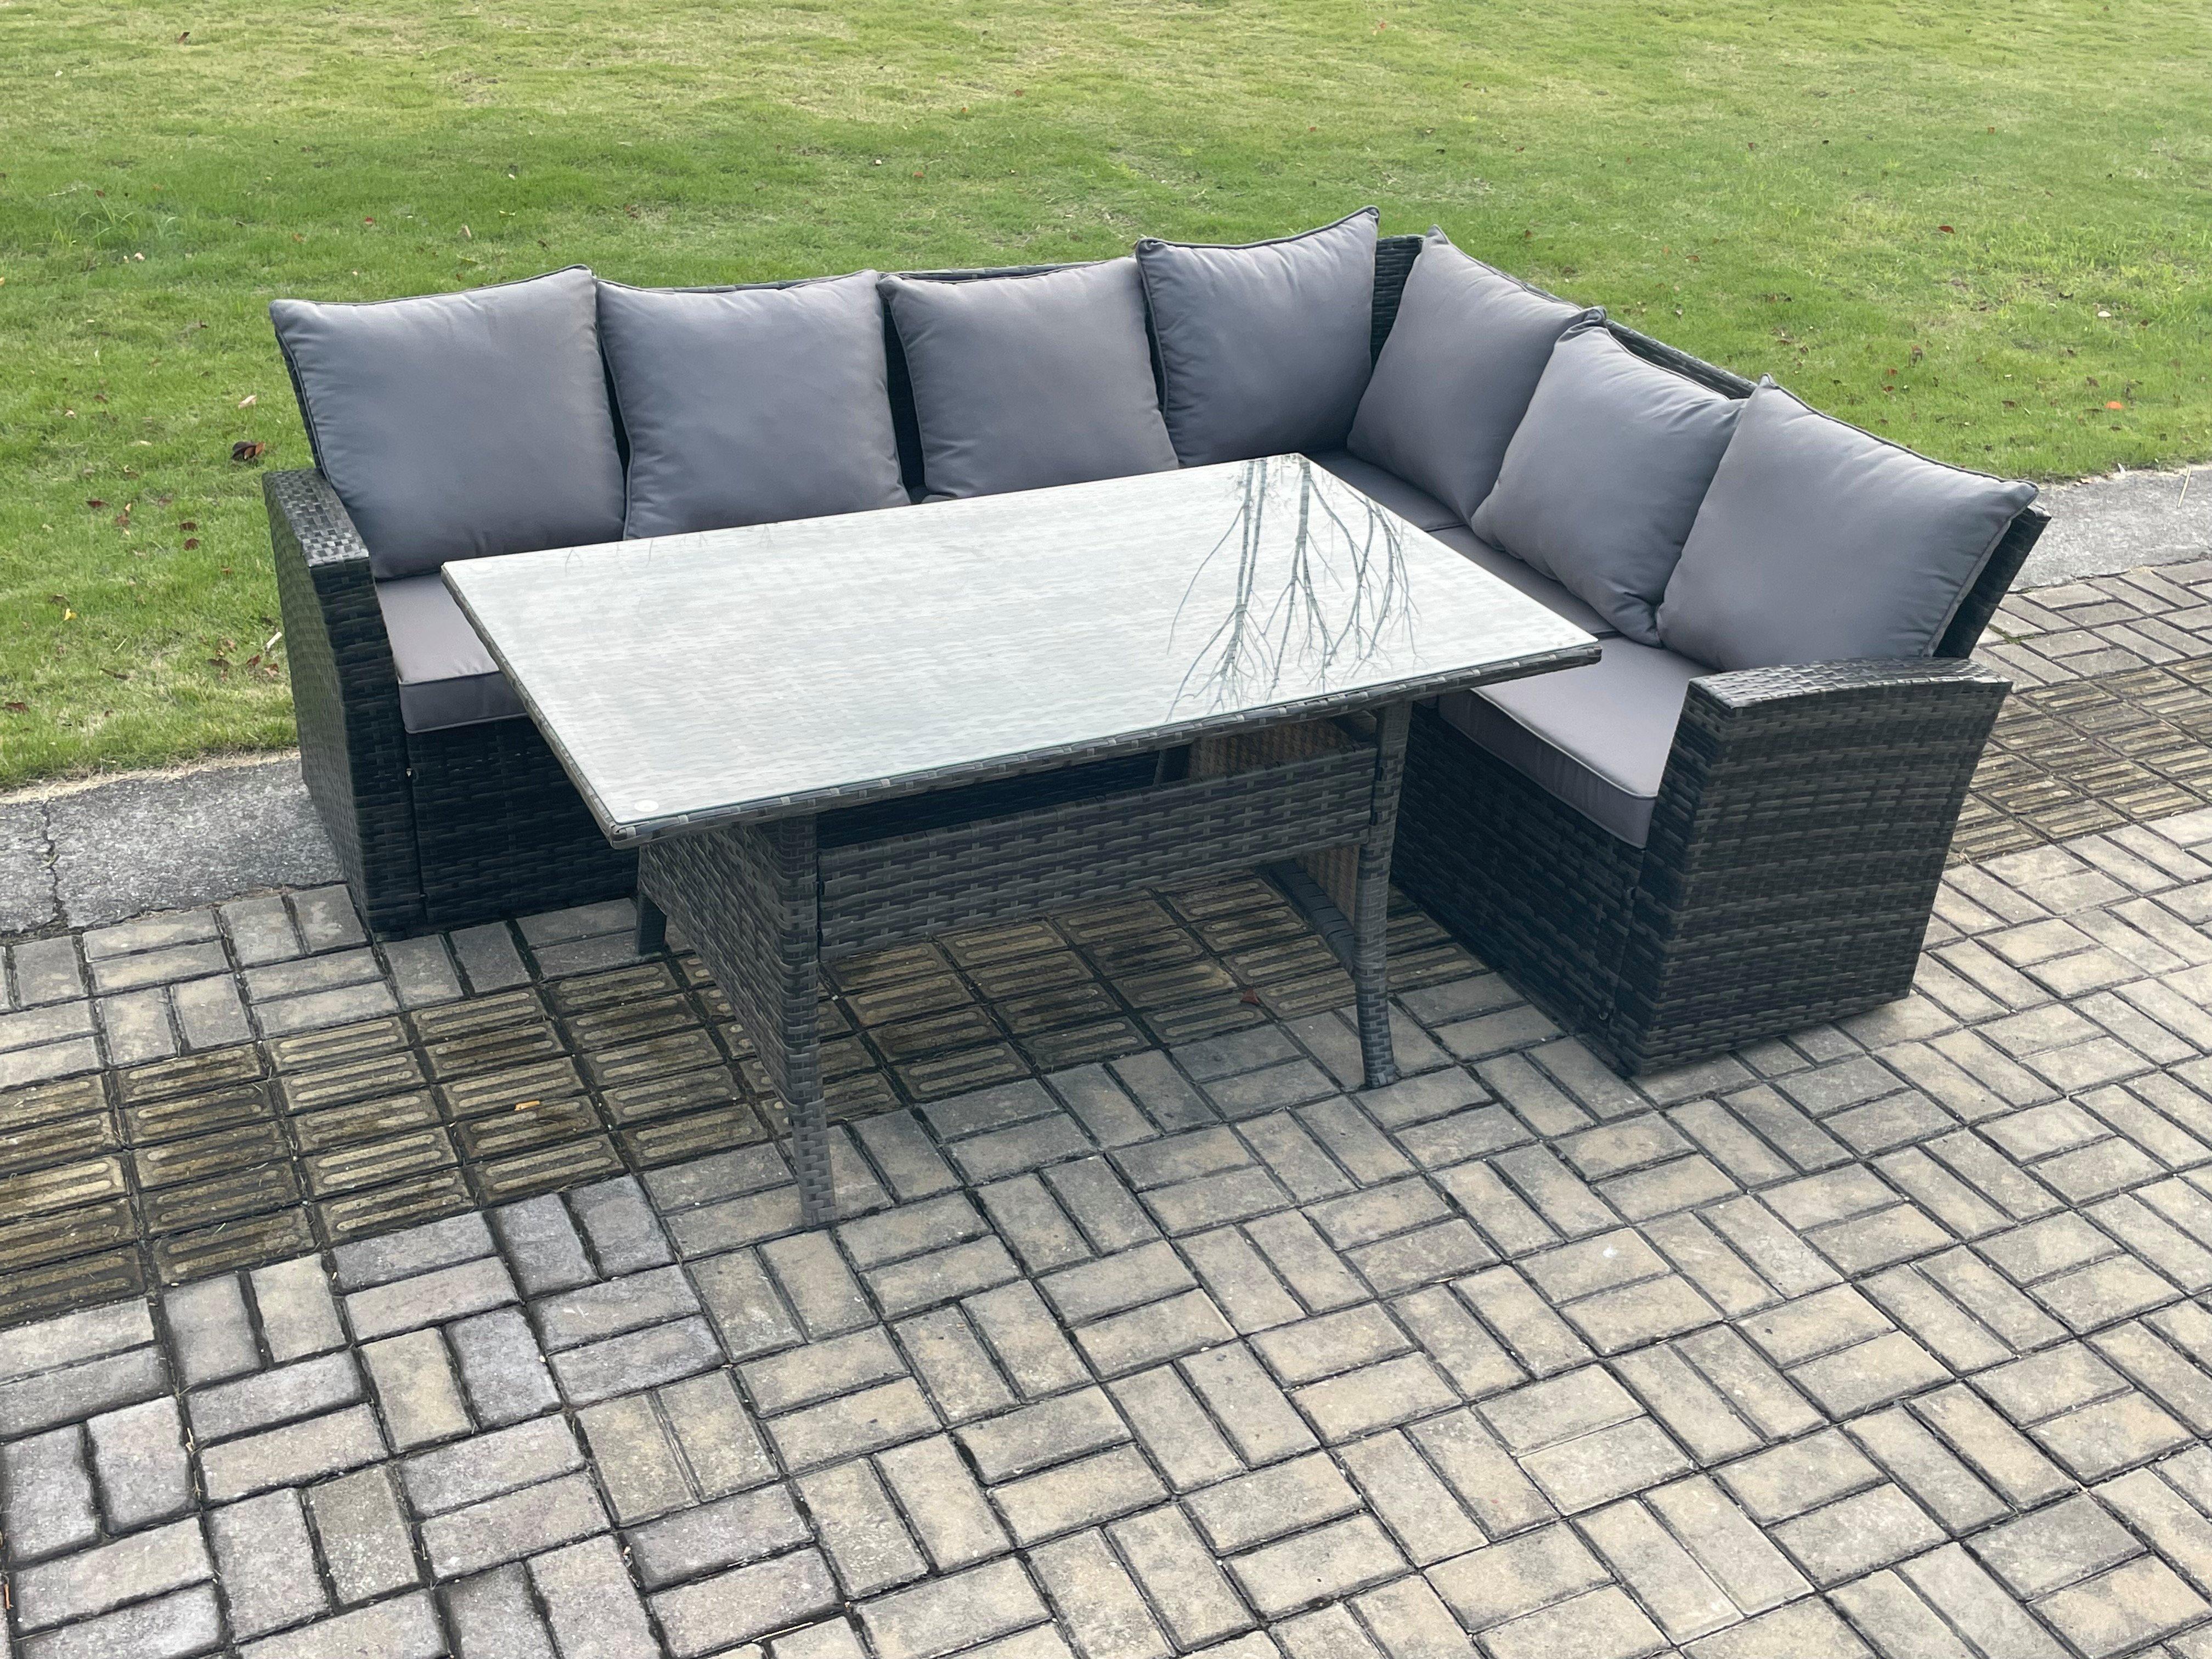 6 Seater Garden Rattan Furniture Corner Sofa Dining Table Set with Temper Glass and Cushions Indoor 